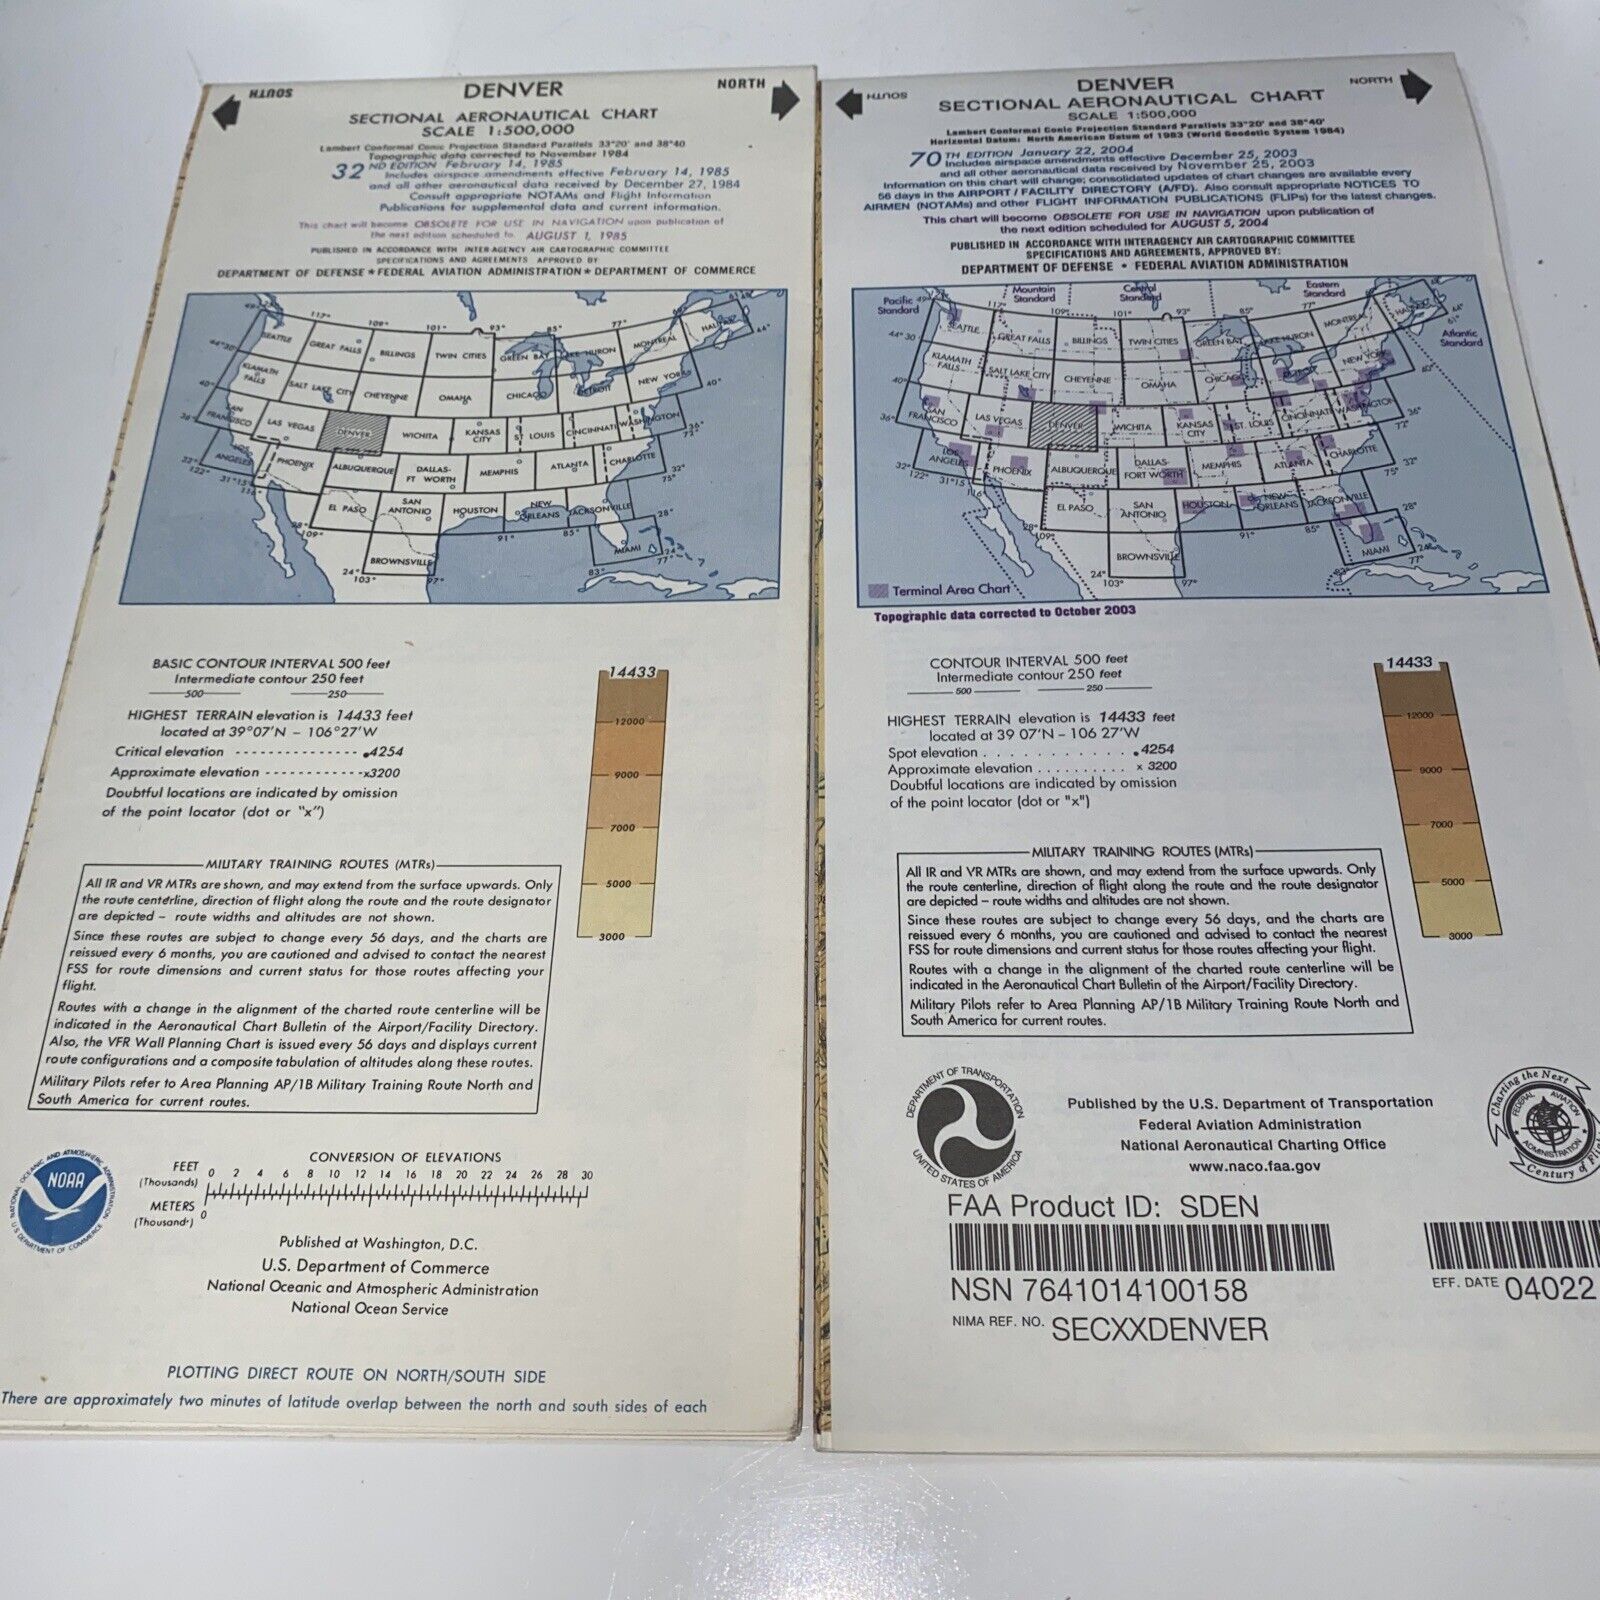 NOAA  Denver Sectional Aeronautical Charts Scale 1:500,000 32nd Edition & 70 Th 